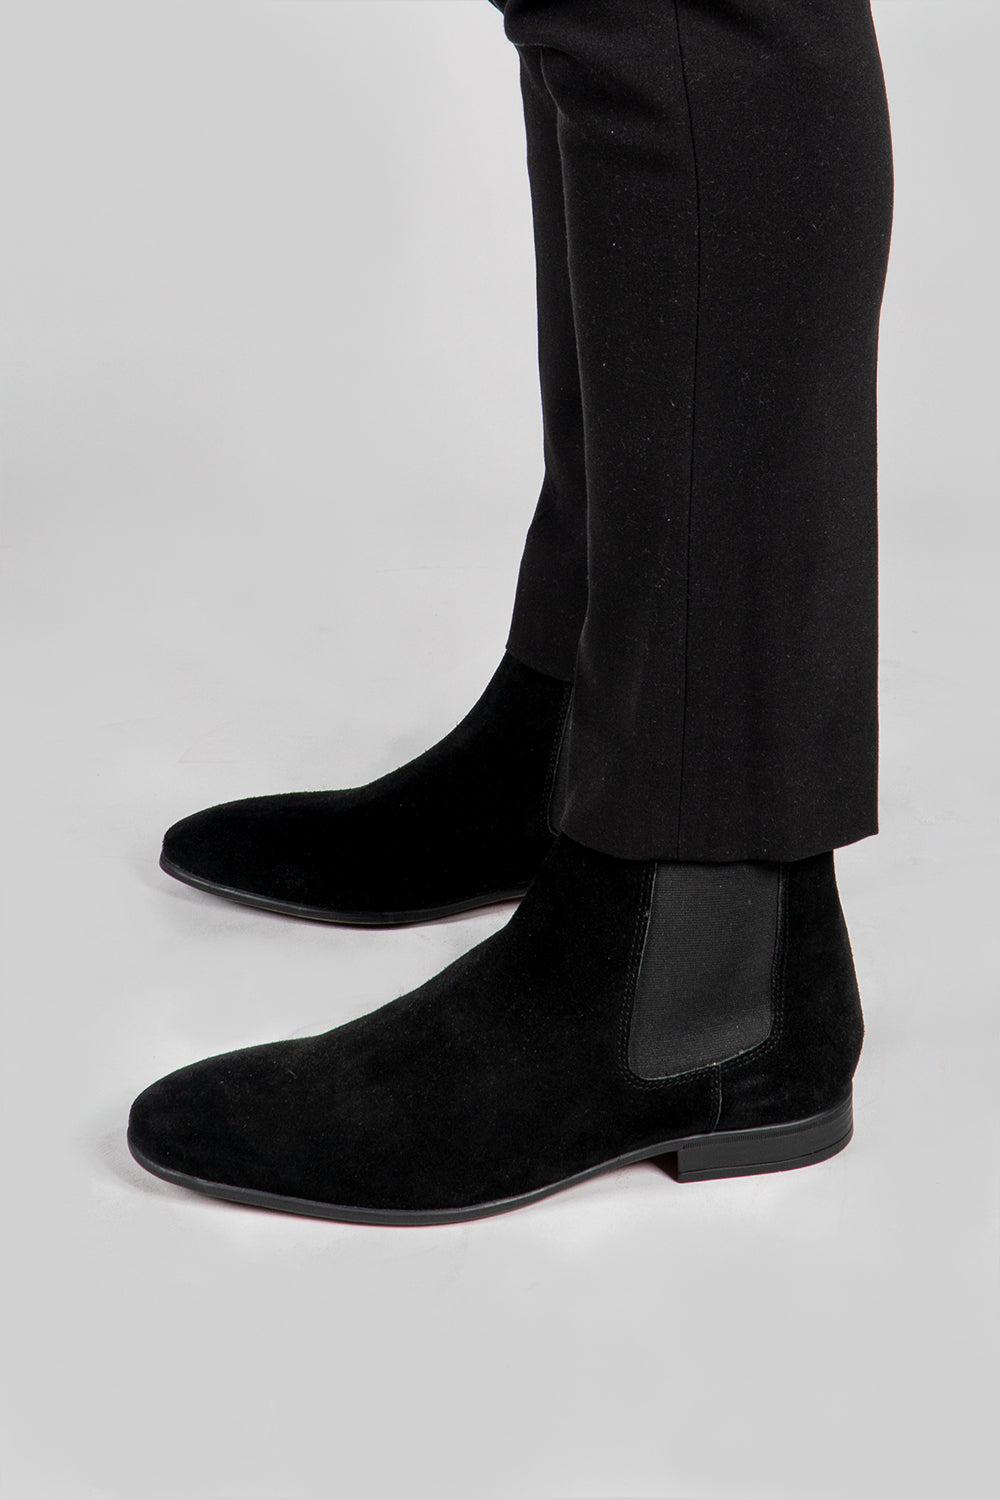 black trousers with black suede boots for men